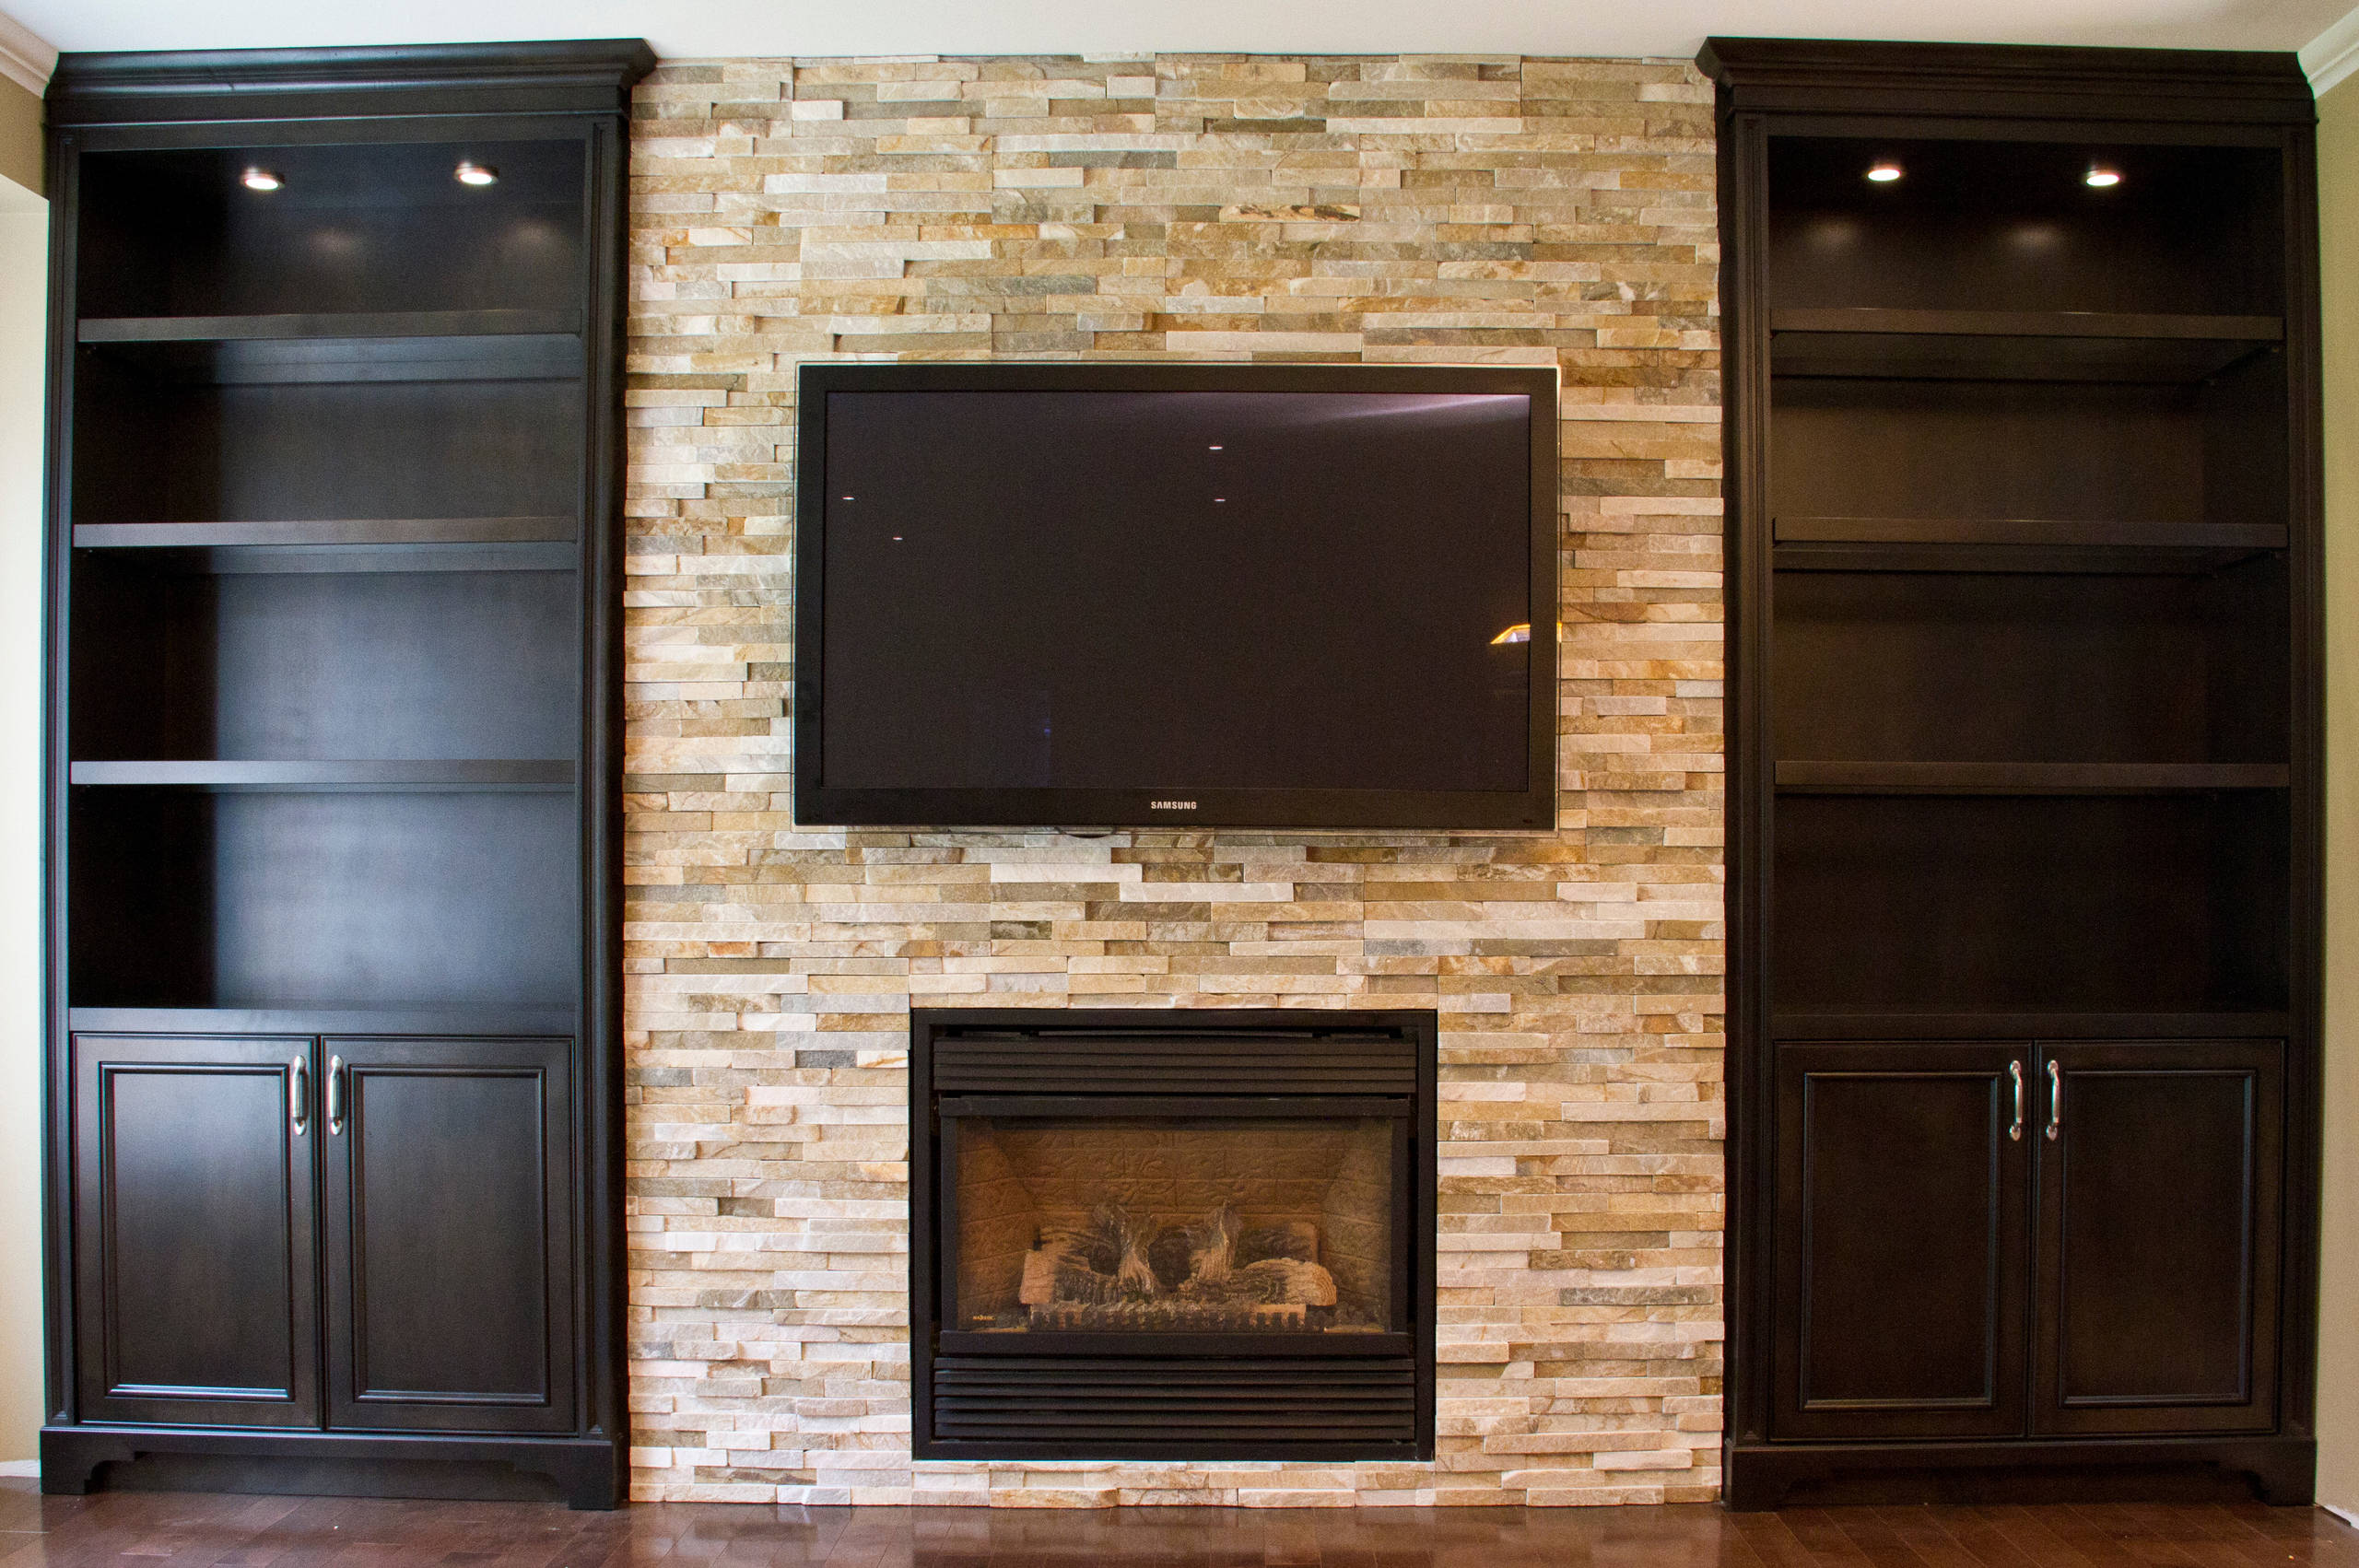 Glass Shelves Built-in Units Around Fireplace